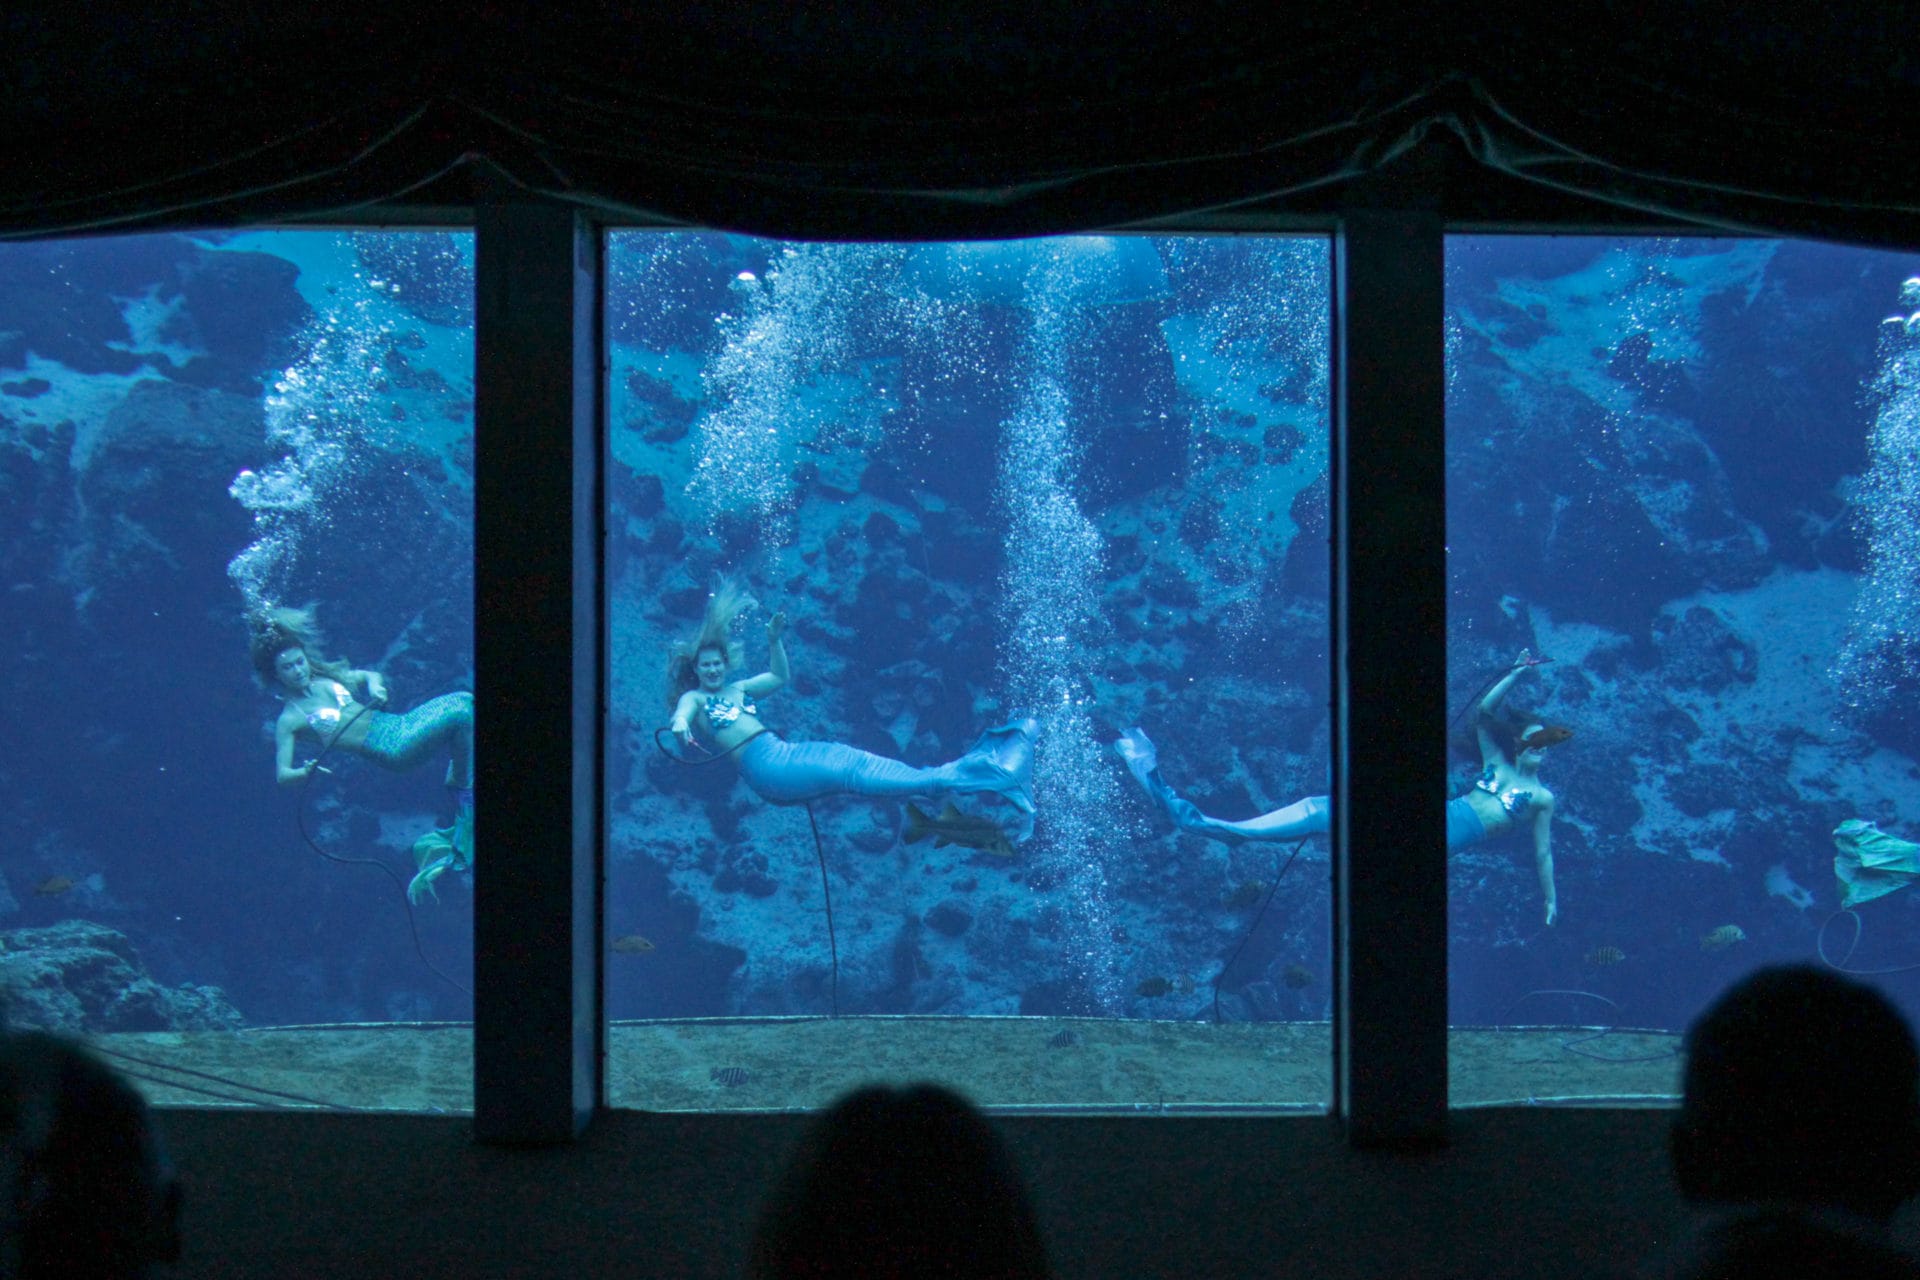 The mermaids perform 365 days a year.